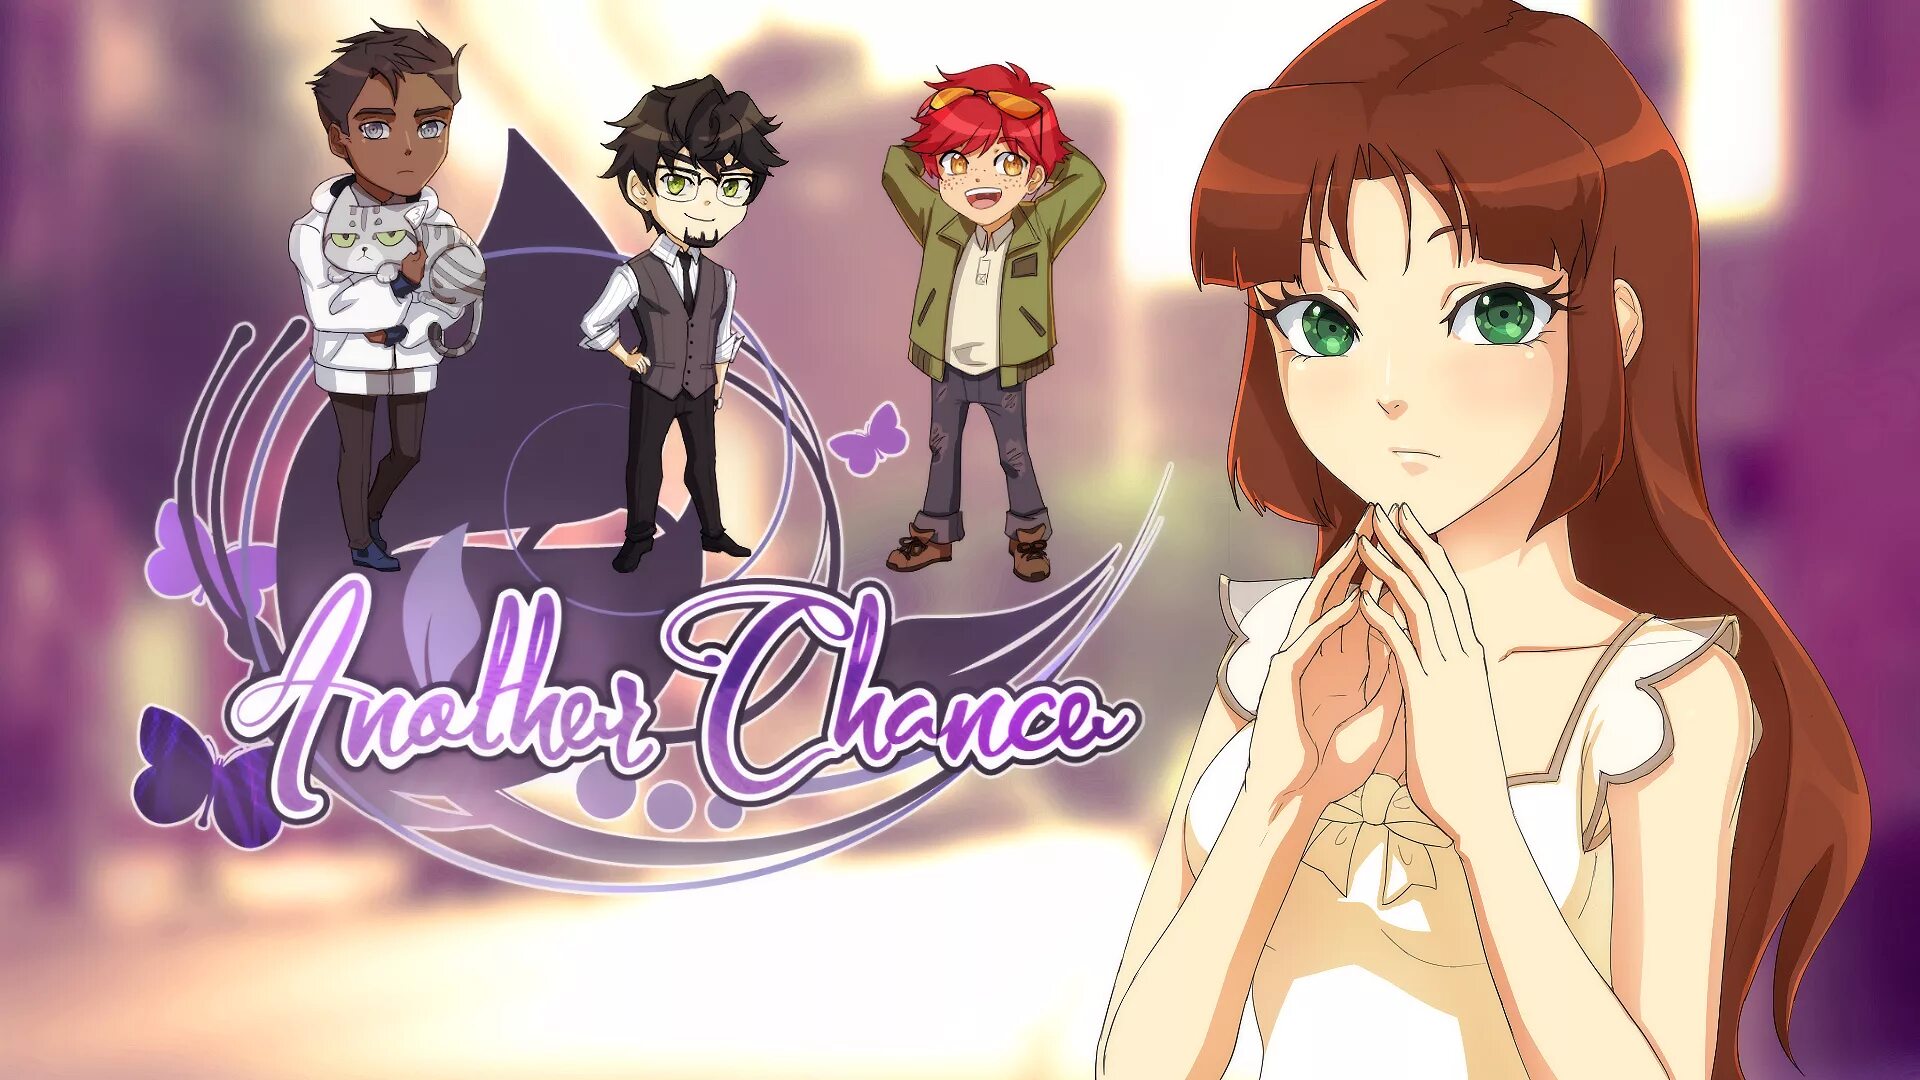 Second chances asteria. Another chance игра. Another chance галерея. Another chance v.1.1.1. Another chance вся галерея.